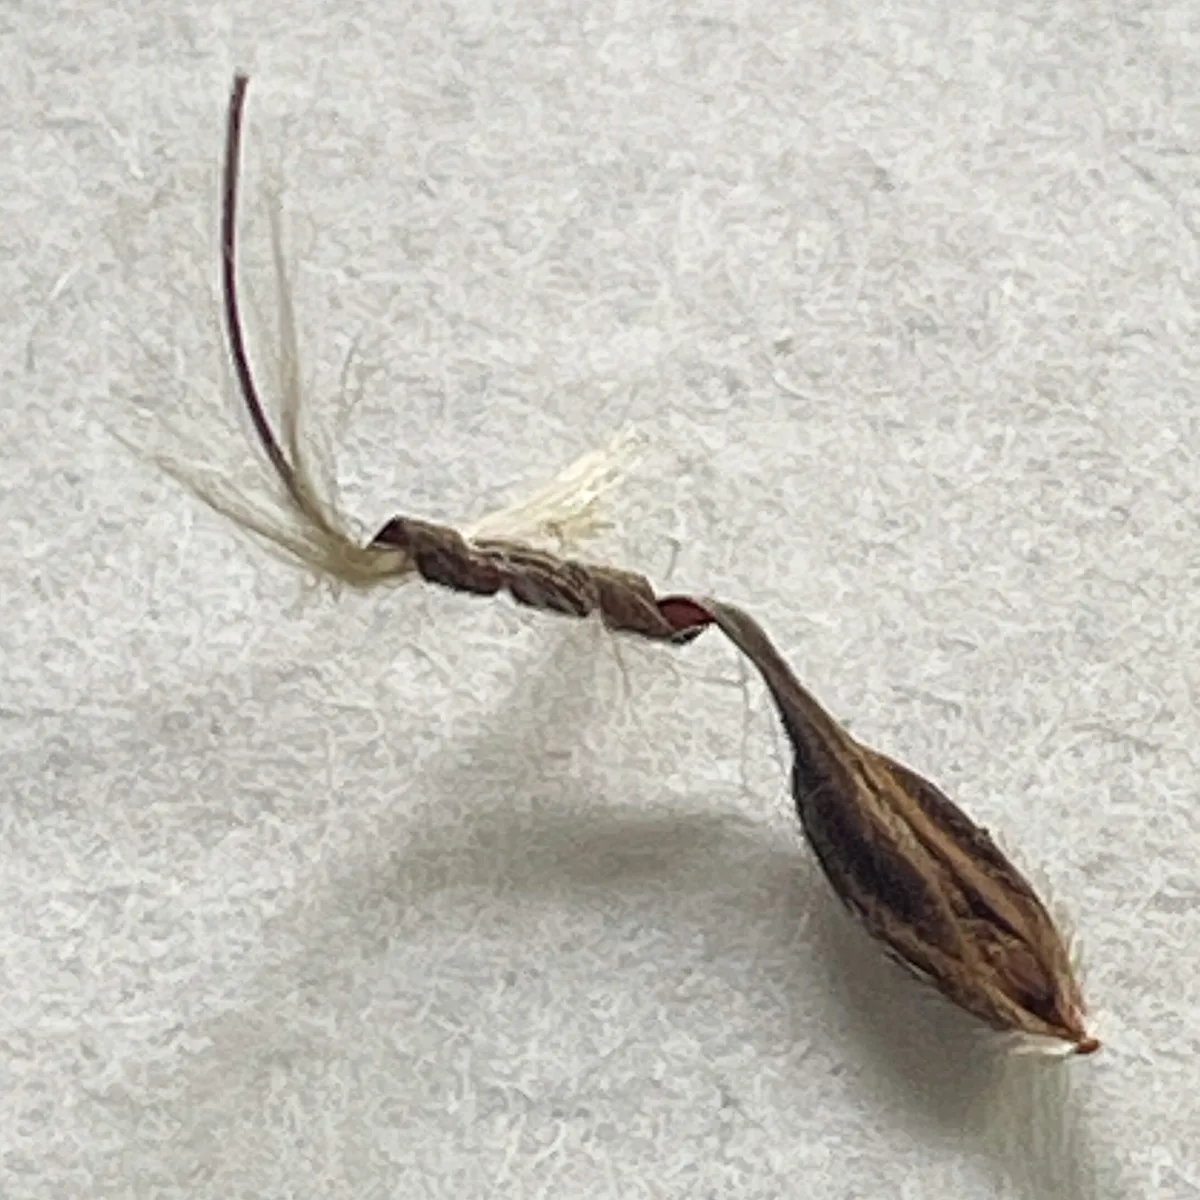 geranium seed with coiled spring end